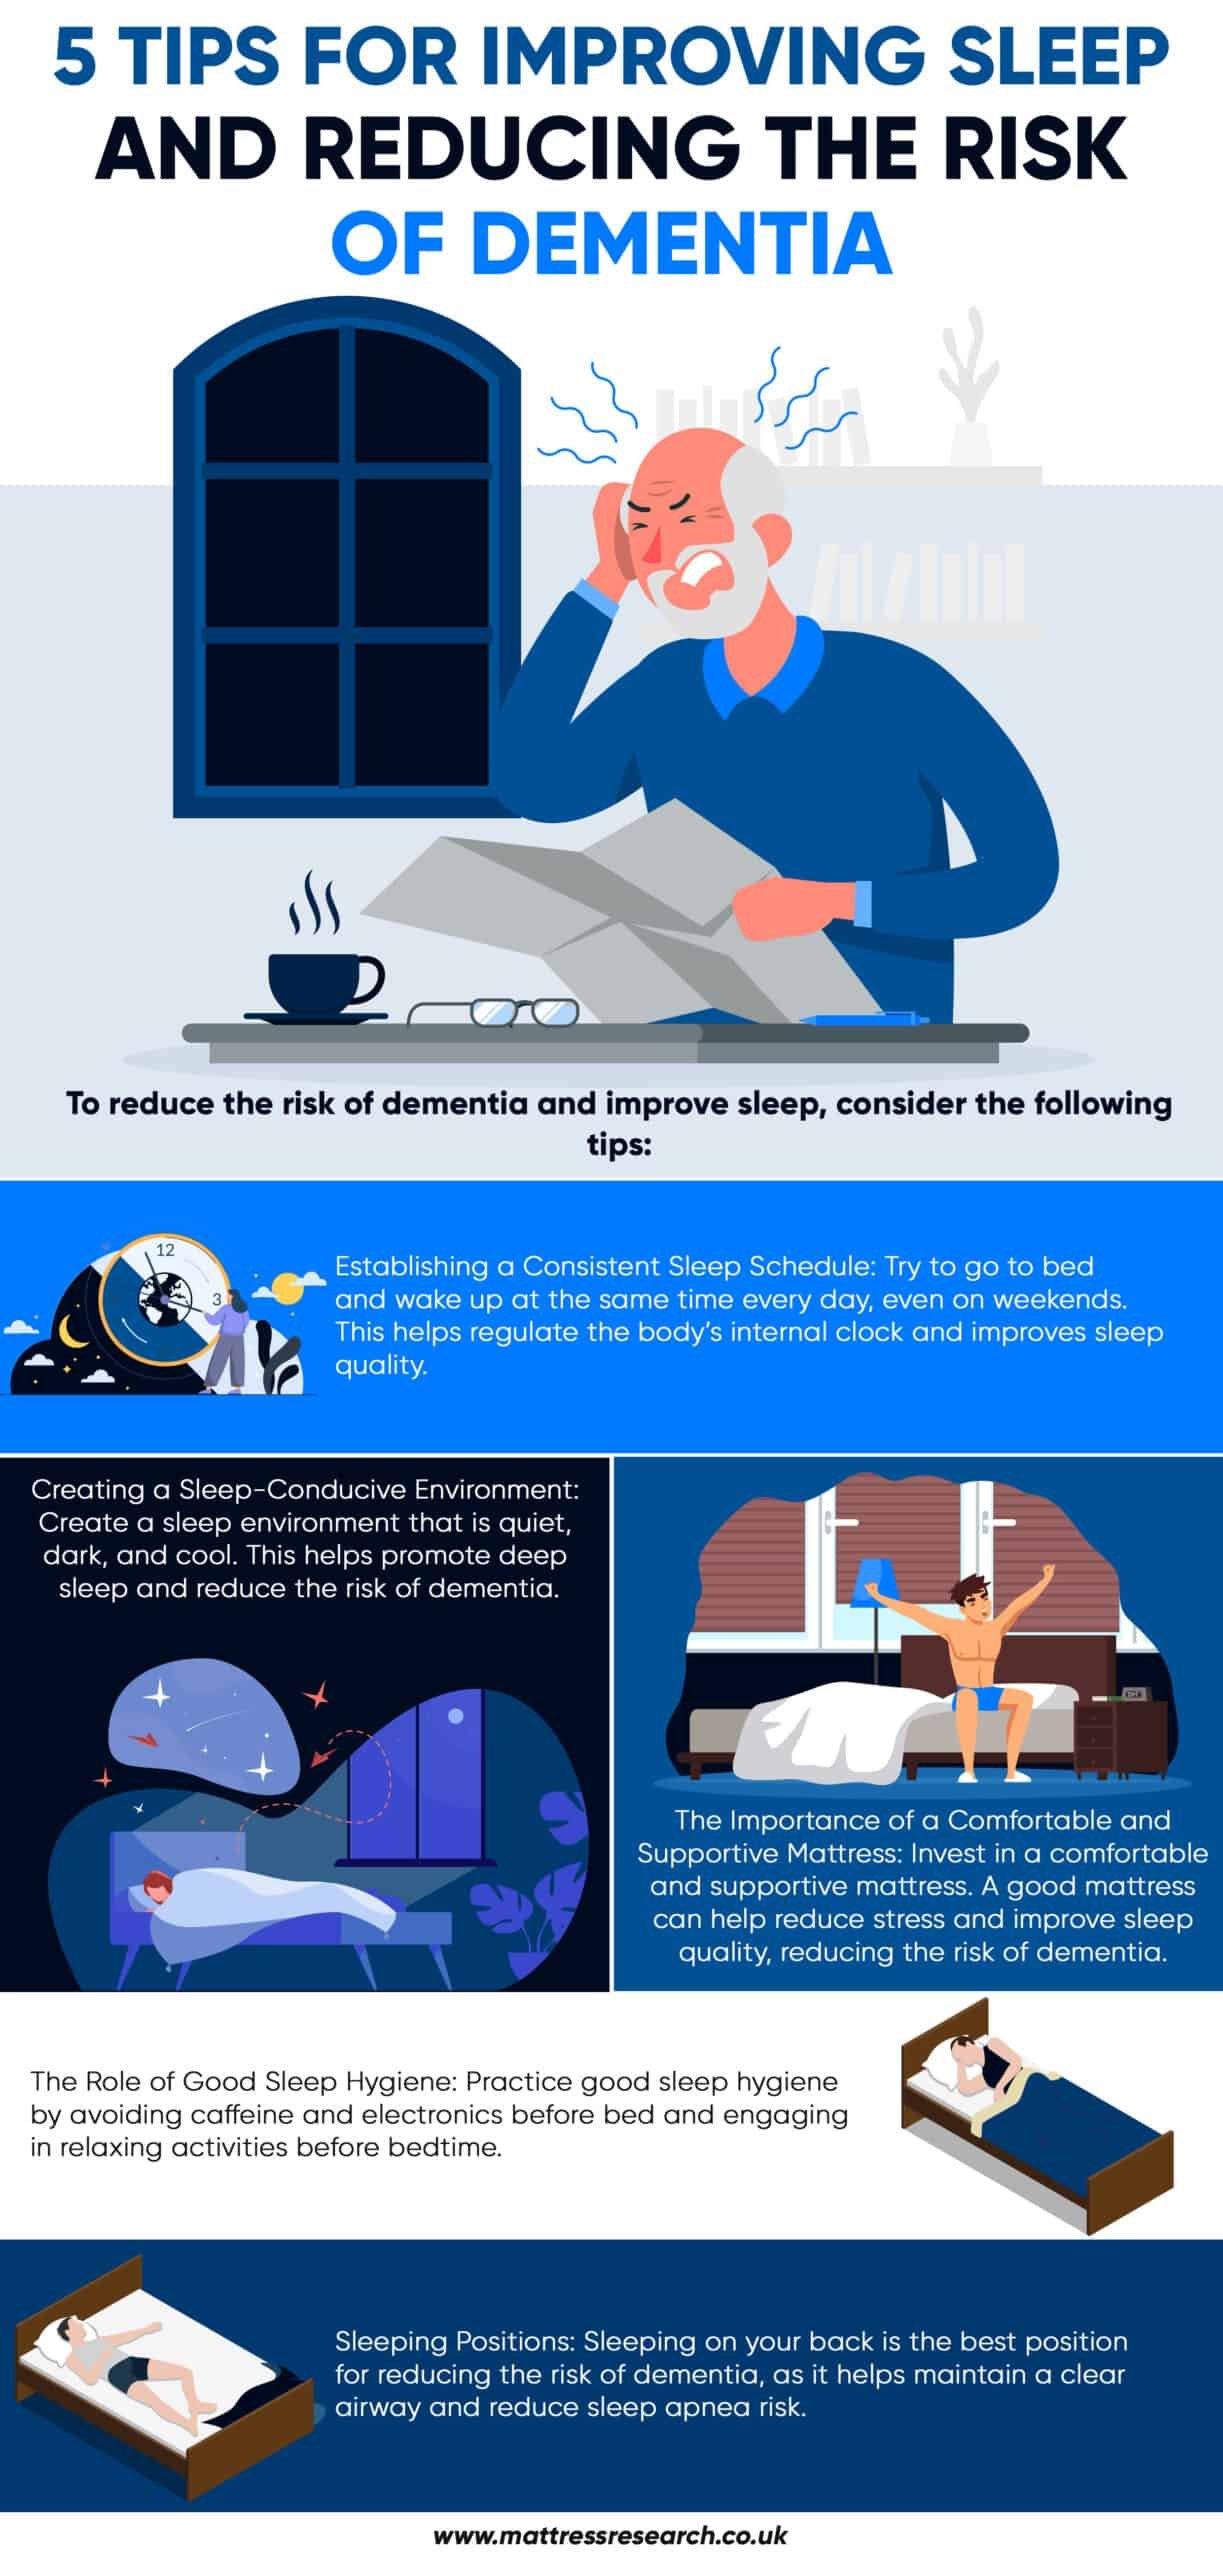 5 Tips for Improving Sleep and Reducing the Risk of Dementia scaled